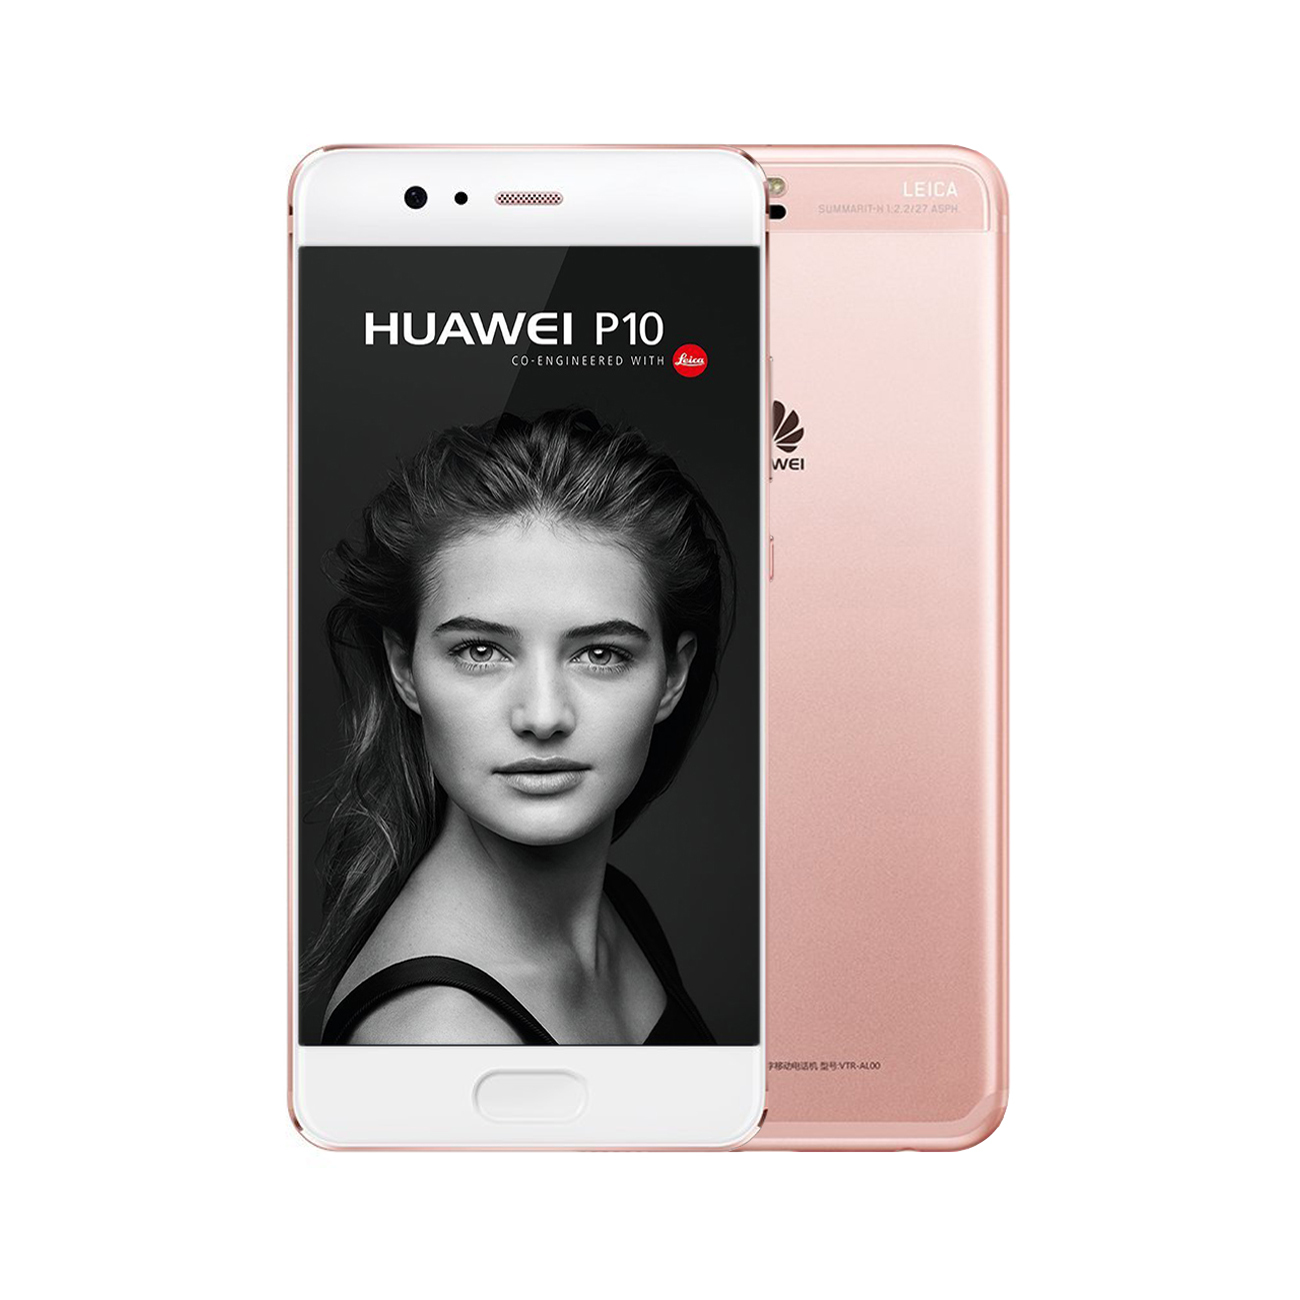 Huawei P10 [32GB] [Rose Gold] [Imperfect]